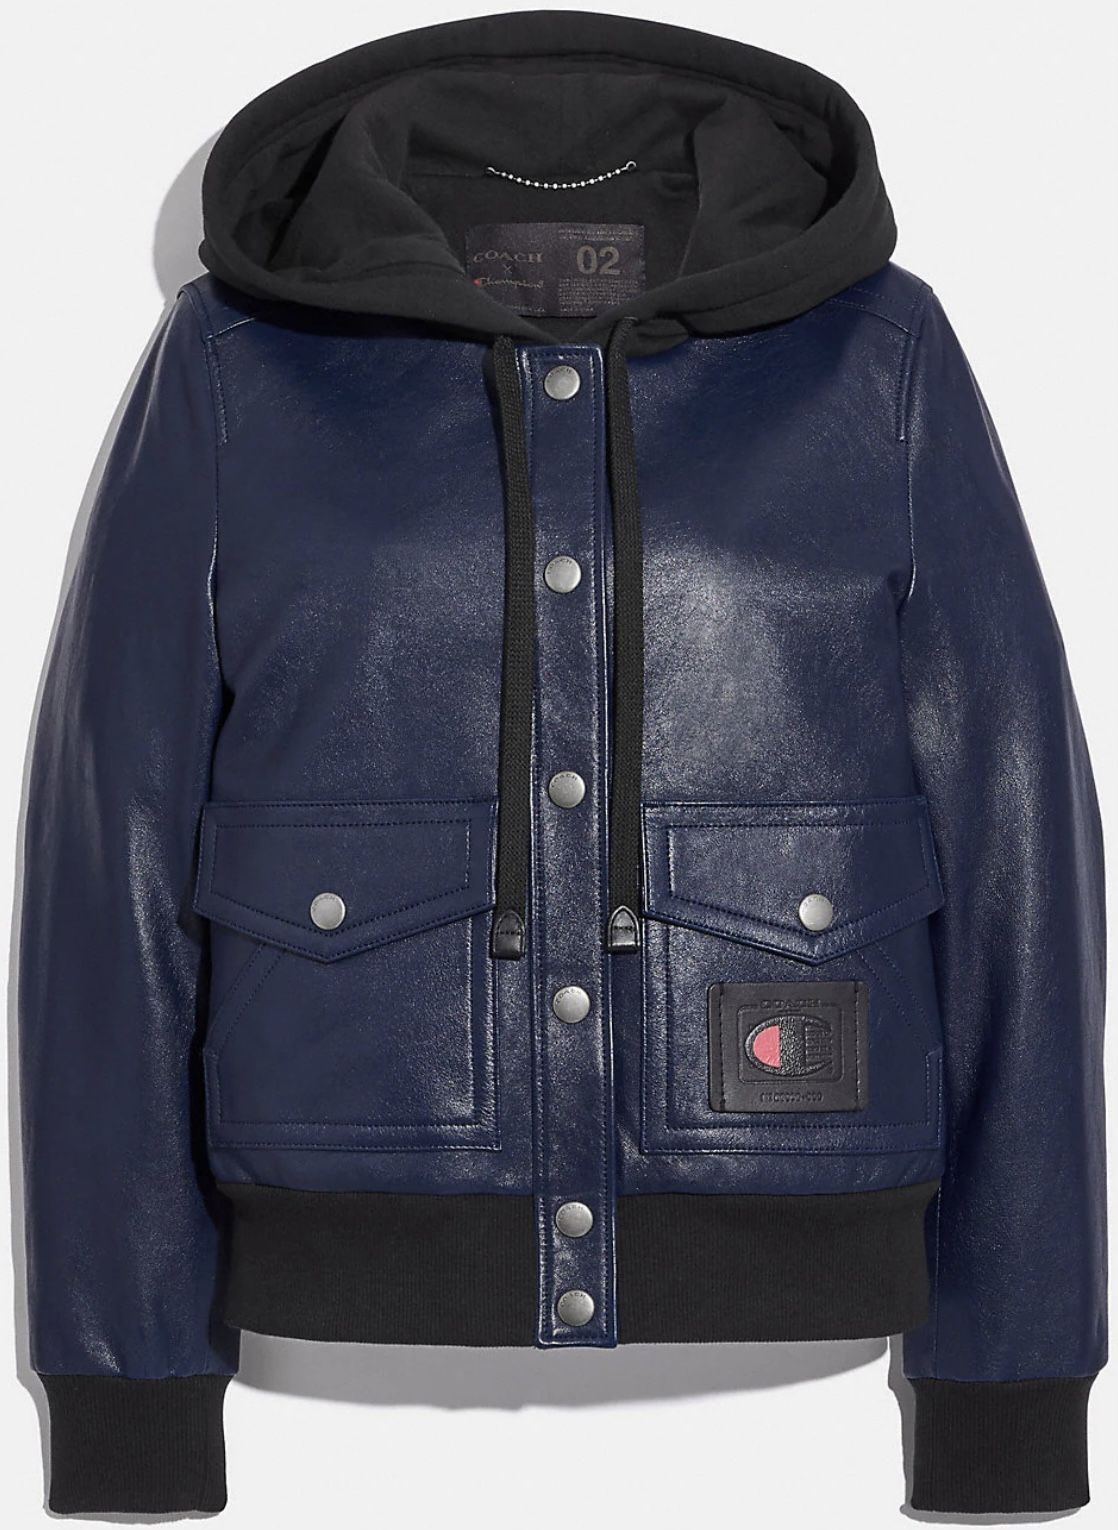 Coach X Champion Super Fleece Hooded Leather Jacket Size 08. Style 3414 Retail $1,250